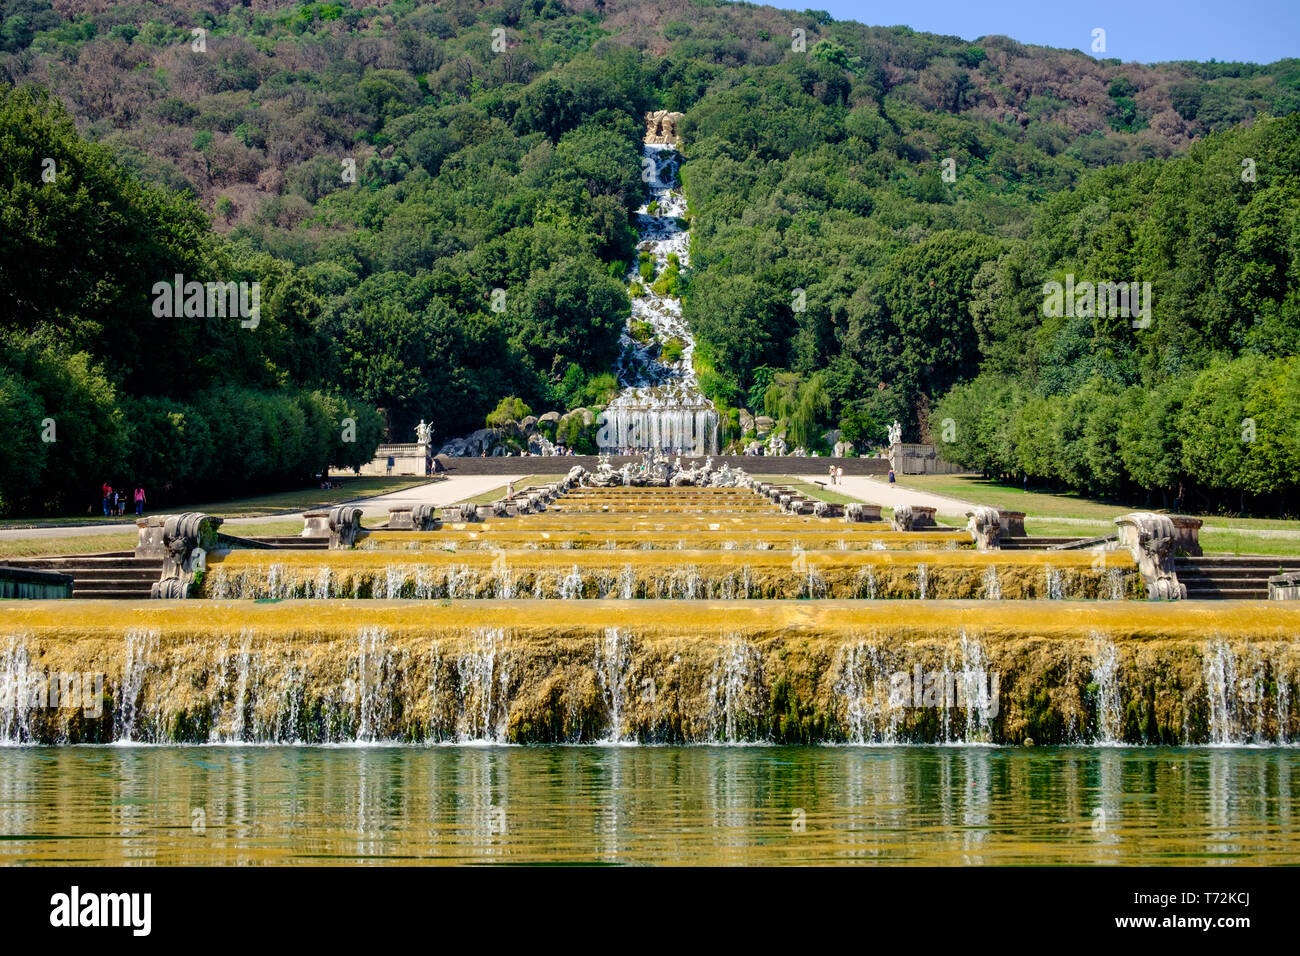 Large water basins are the center of the gardens of the 'Reggia di Caserta'. In the distance, you see a high artificial waterfall. Stock Photo